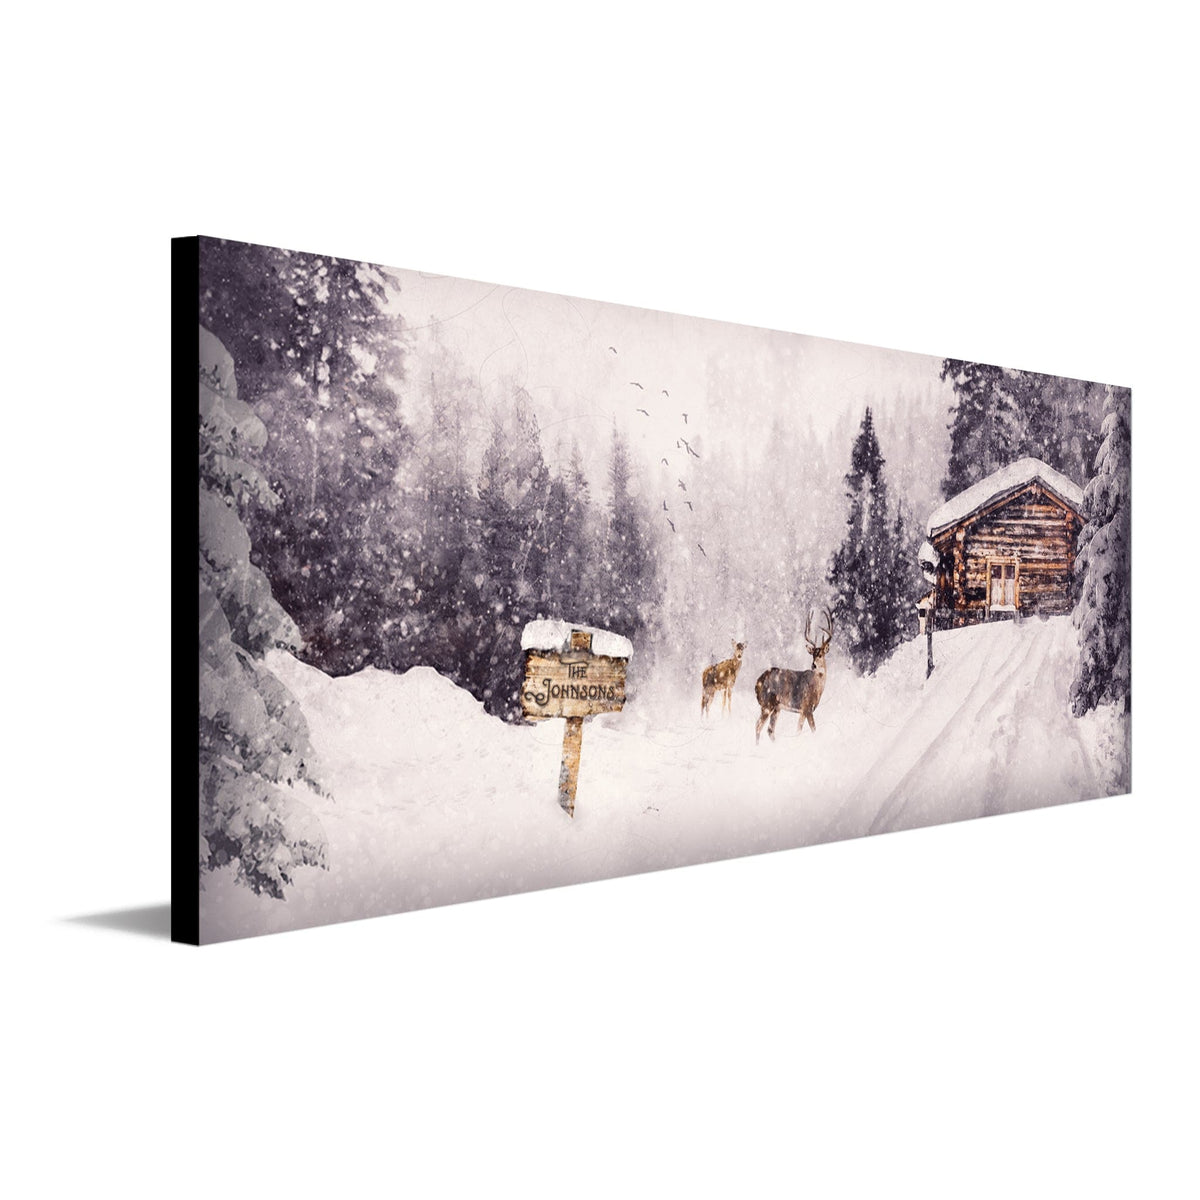 Personalized Gift or Art - Winter Cabin Landscape Art from Personal-Prints